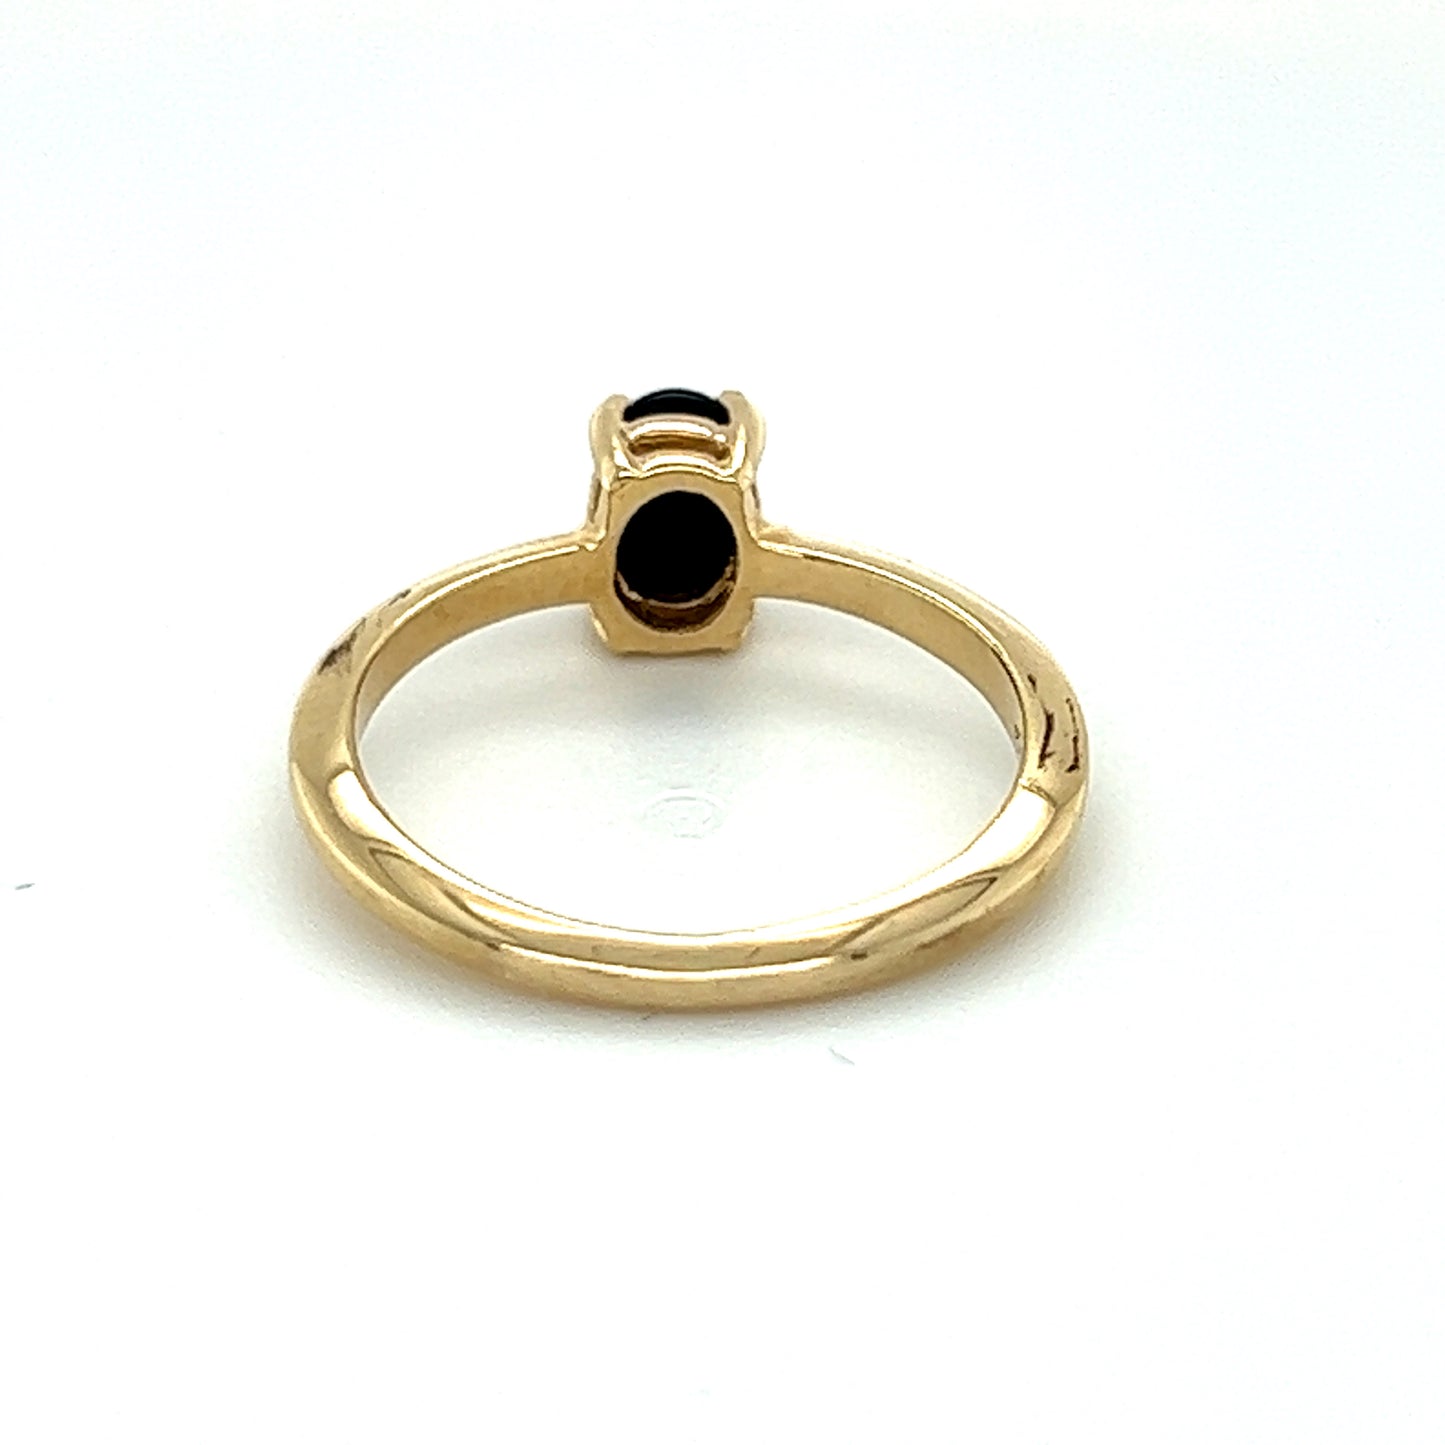 14k Yellow Gold Ring With Onyx Stone 1.2dwt